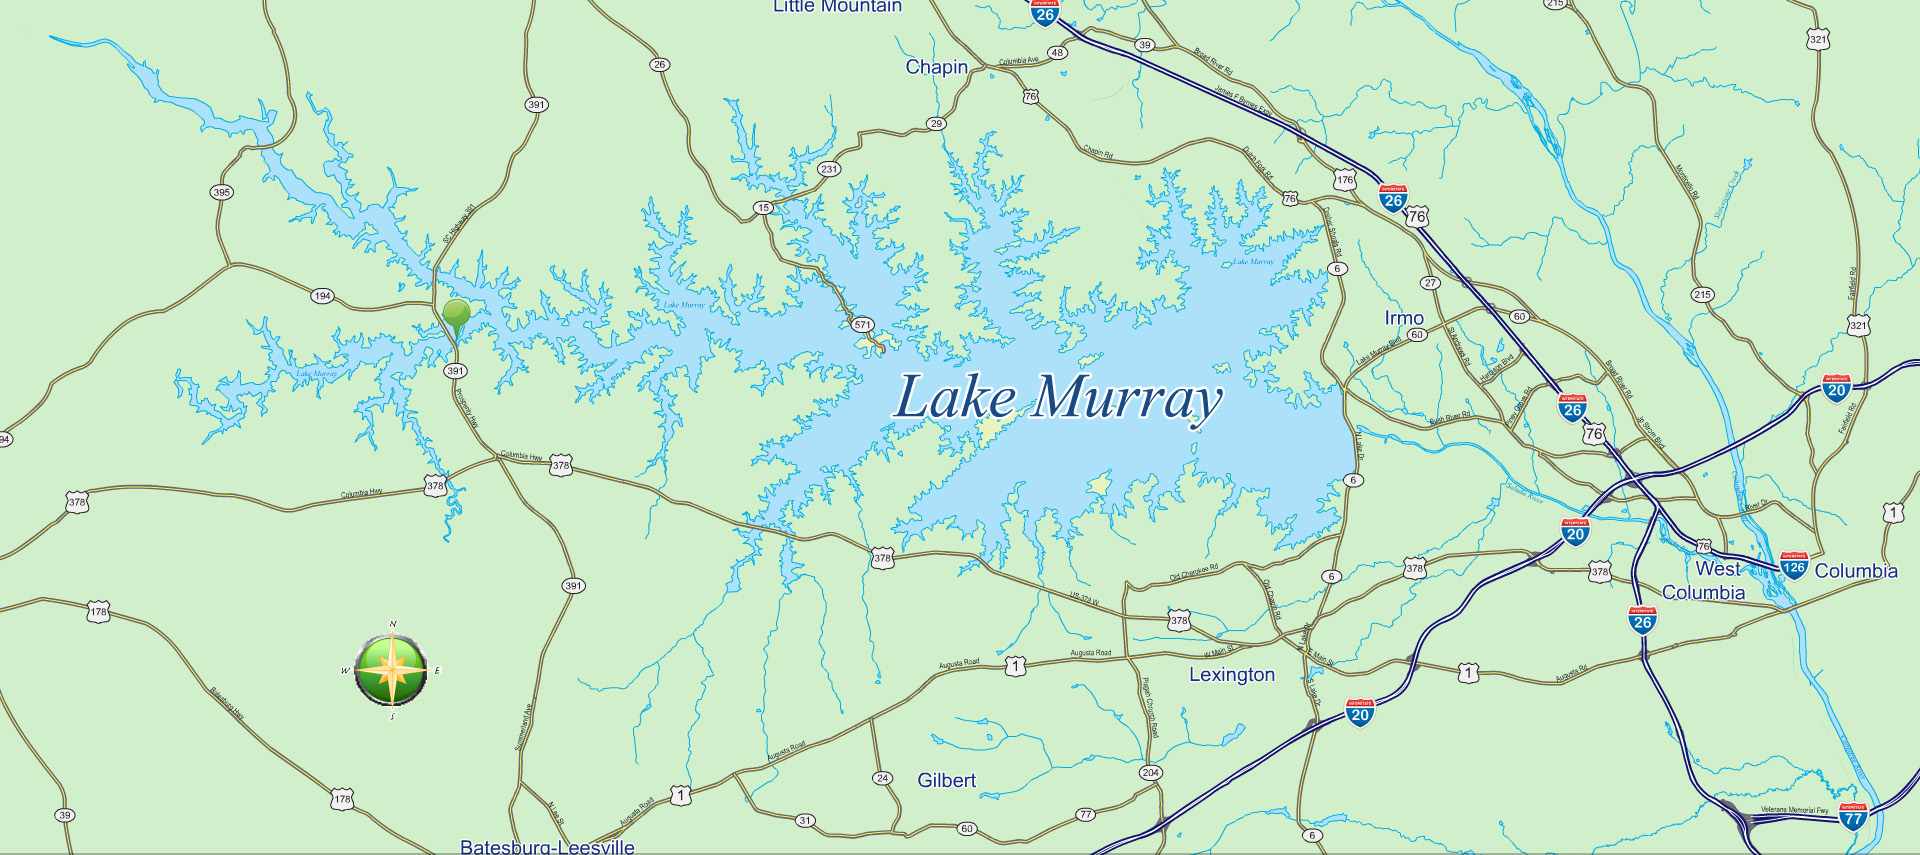 Lake Murray - one of the oldest in SC